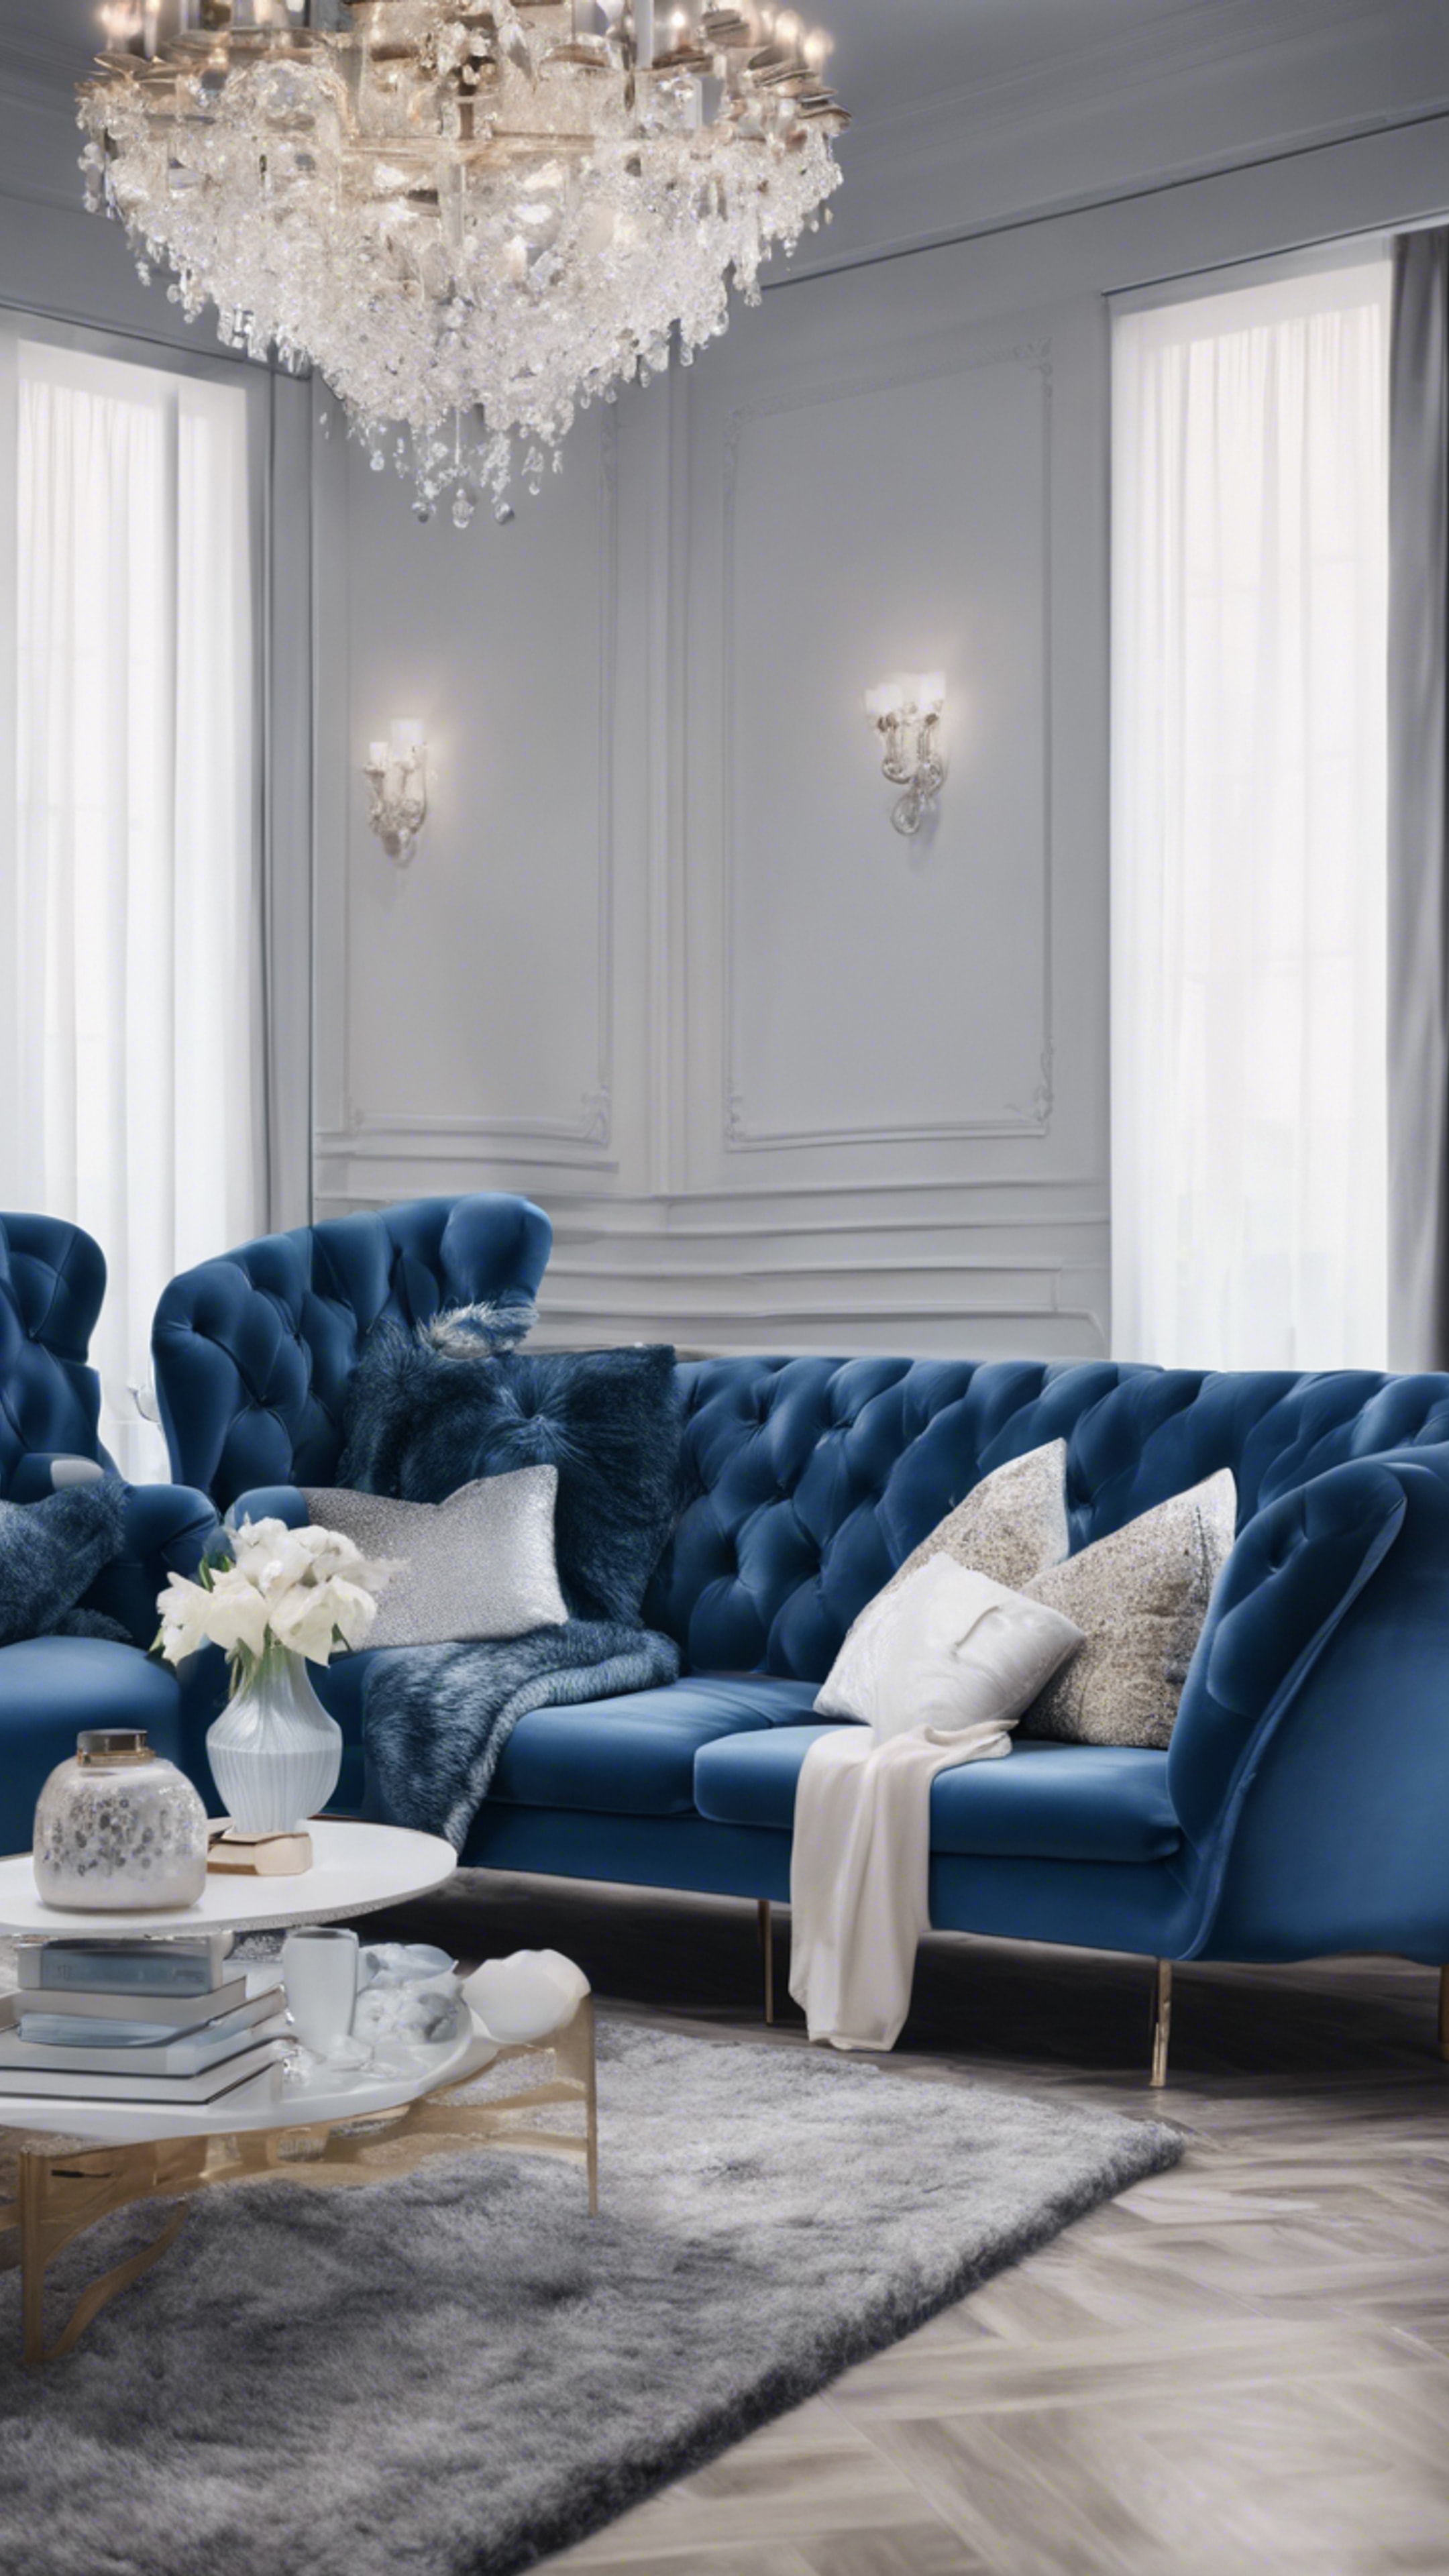 A modern living room with blue velvet furniture embellished by elegant white accessories. Wallpaper[d7ffdbf2b6784c69ae07]